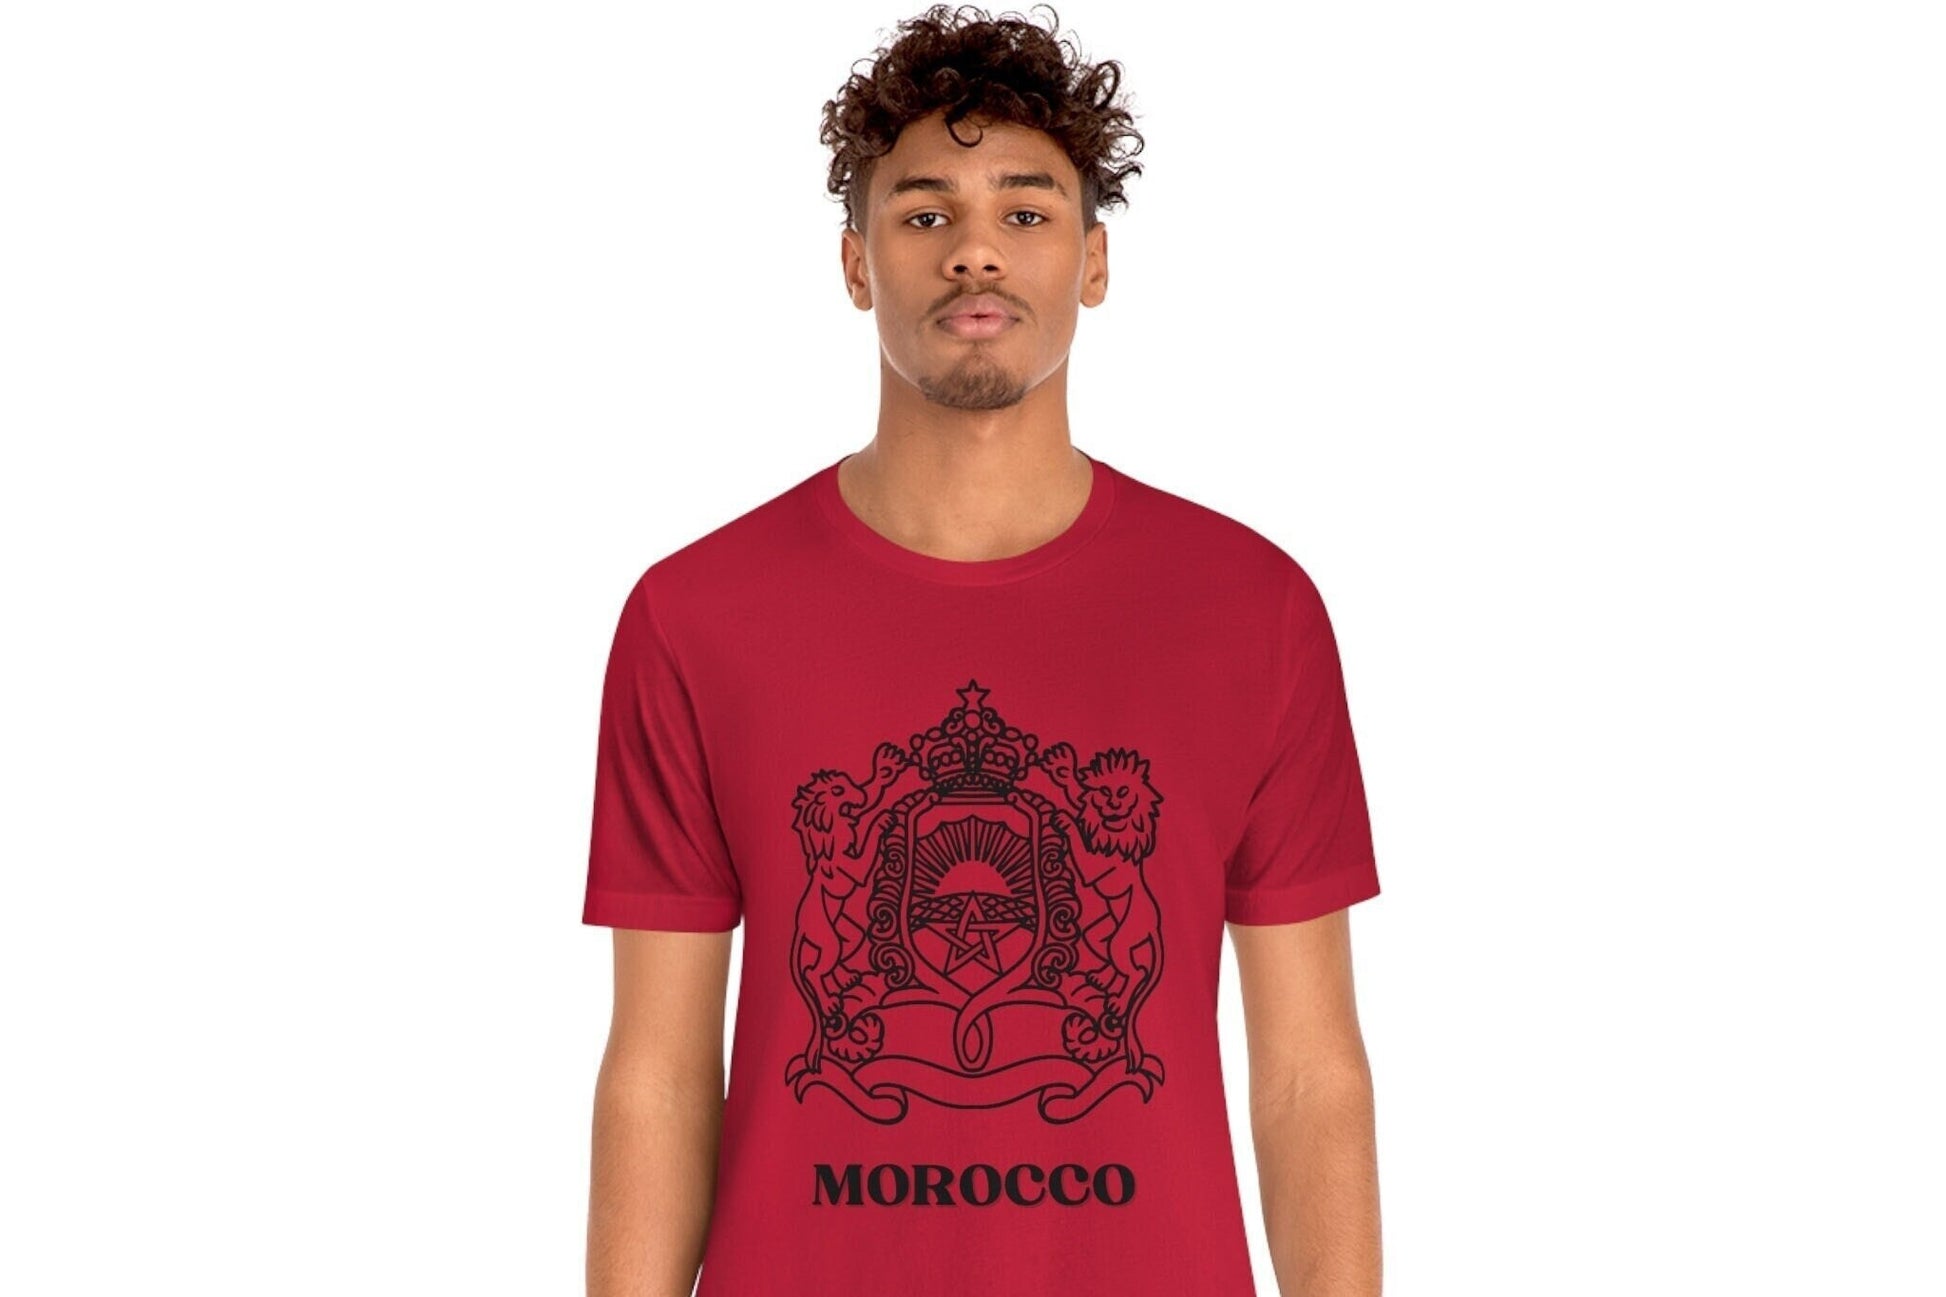 Morocco Team Jersey, World Cup Morocco Fan Shirt, FIFA 2022 Morocco Soccer lover, Morocco Lovers Jersey, Morocco Short Sleeve Tee